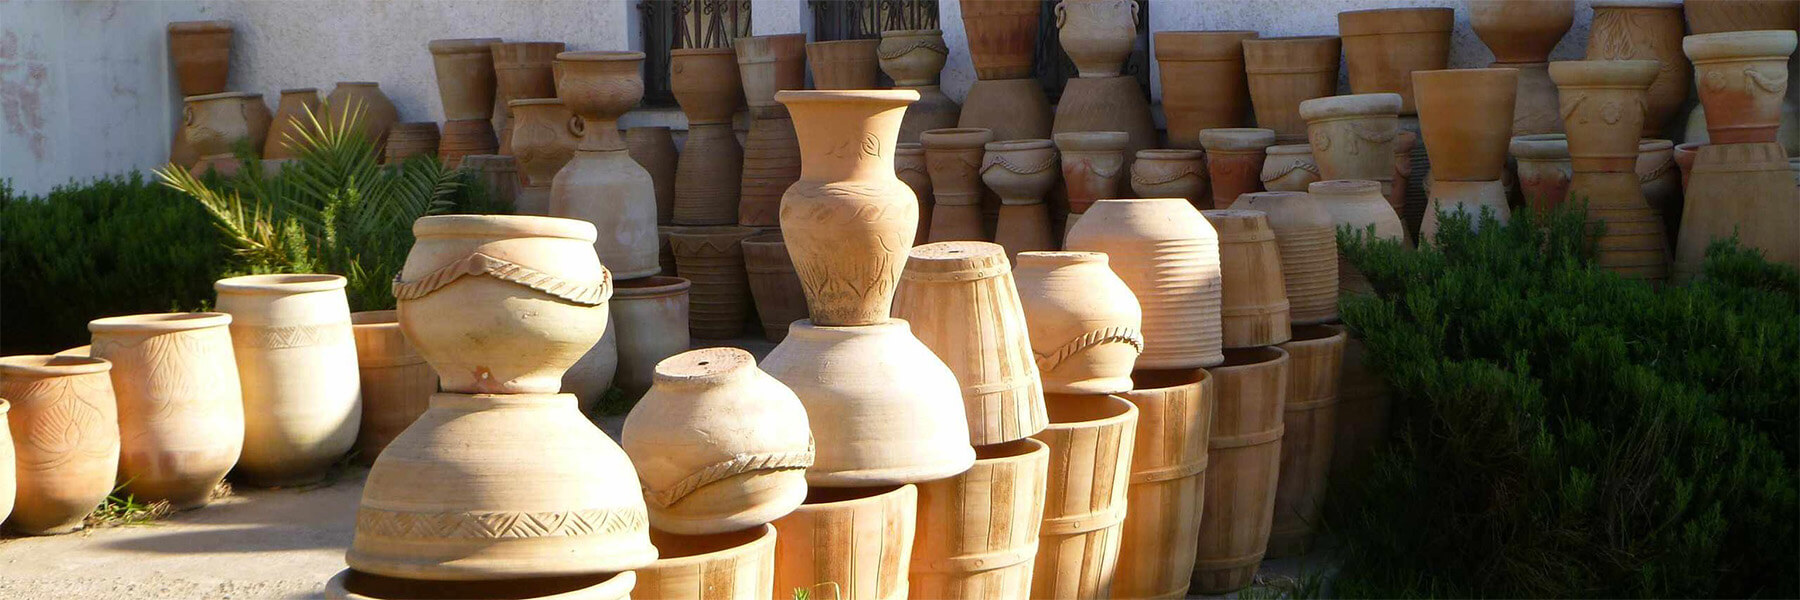 pallets of empty clay pots